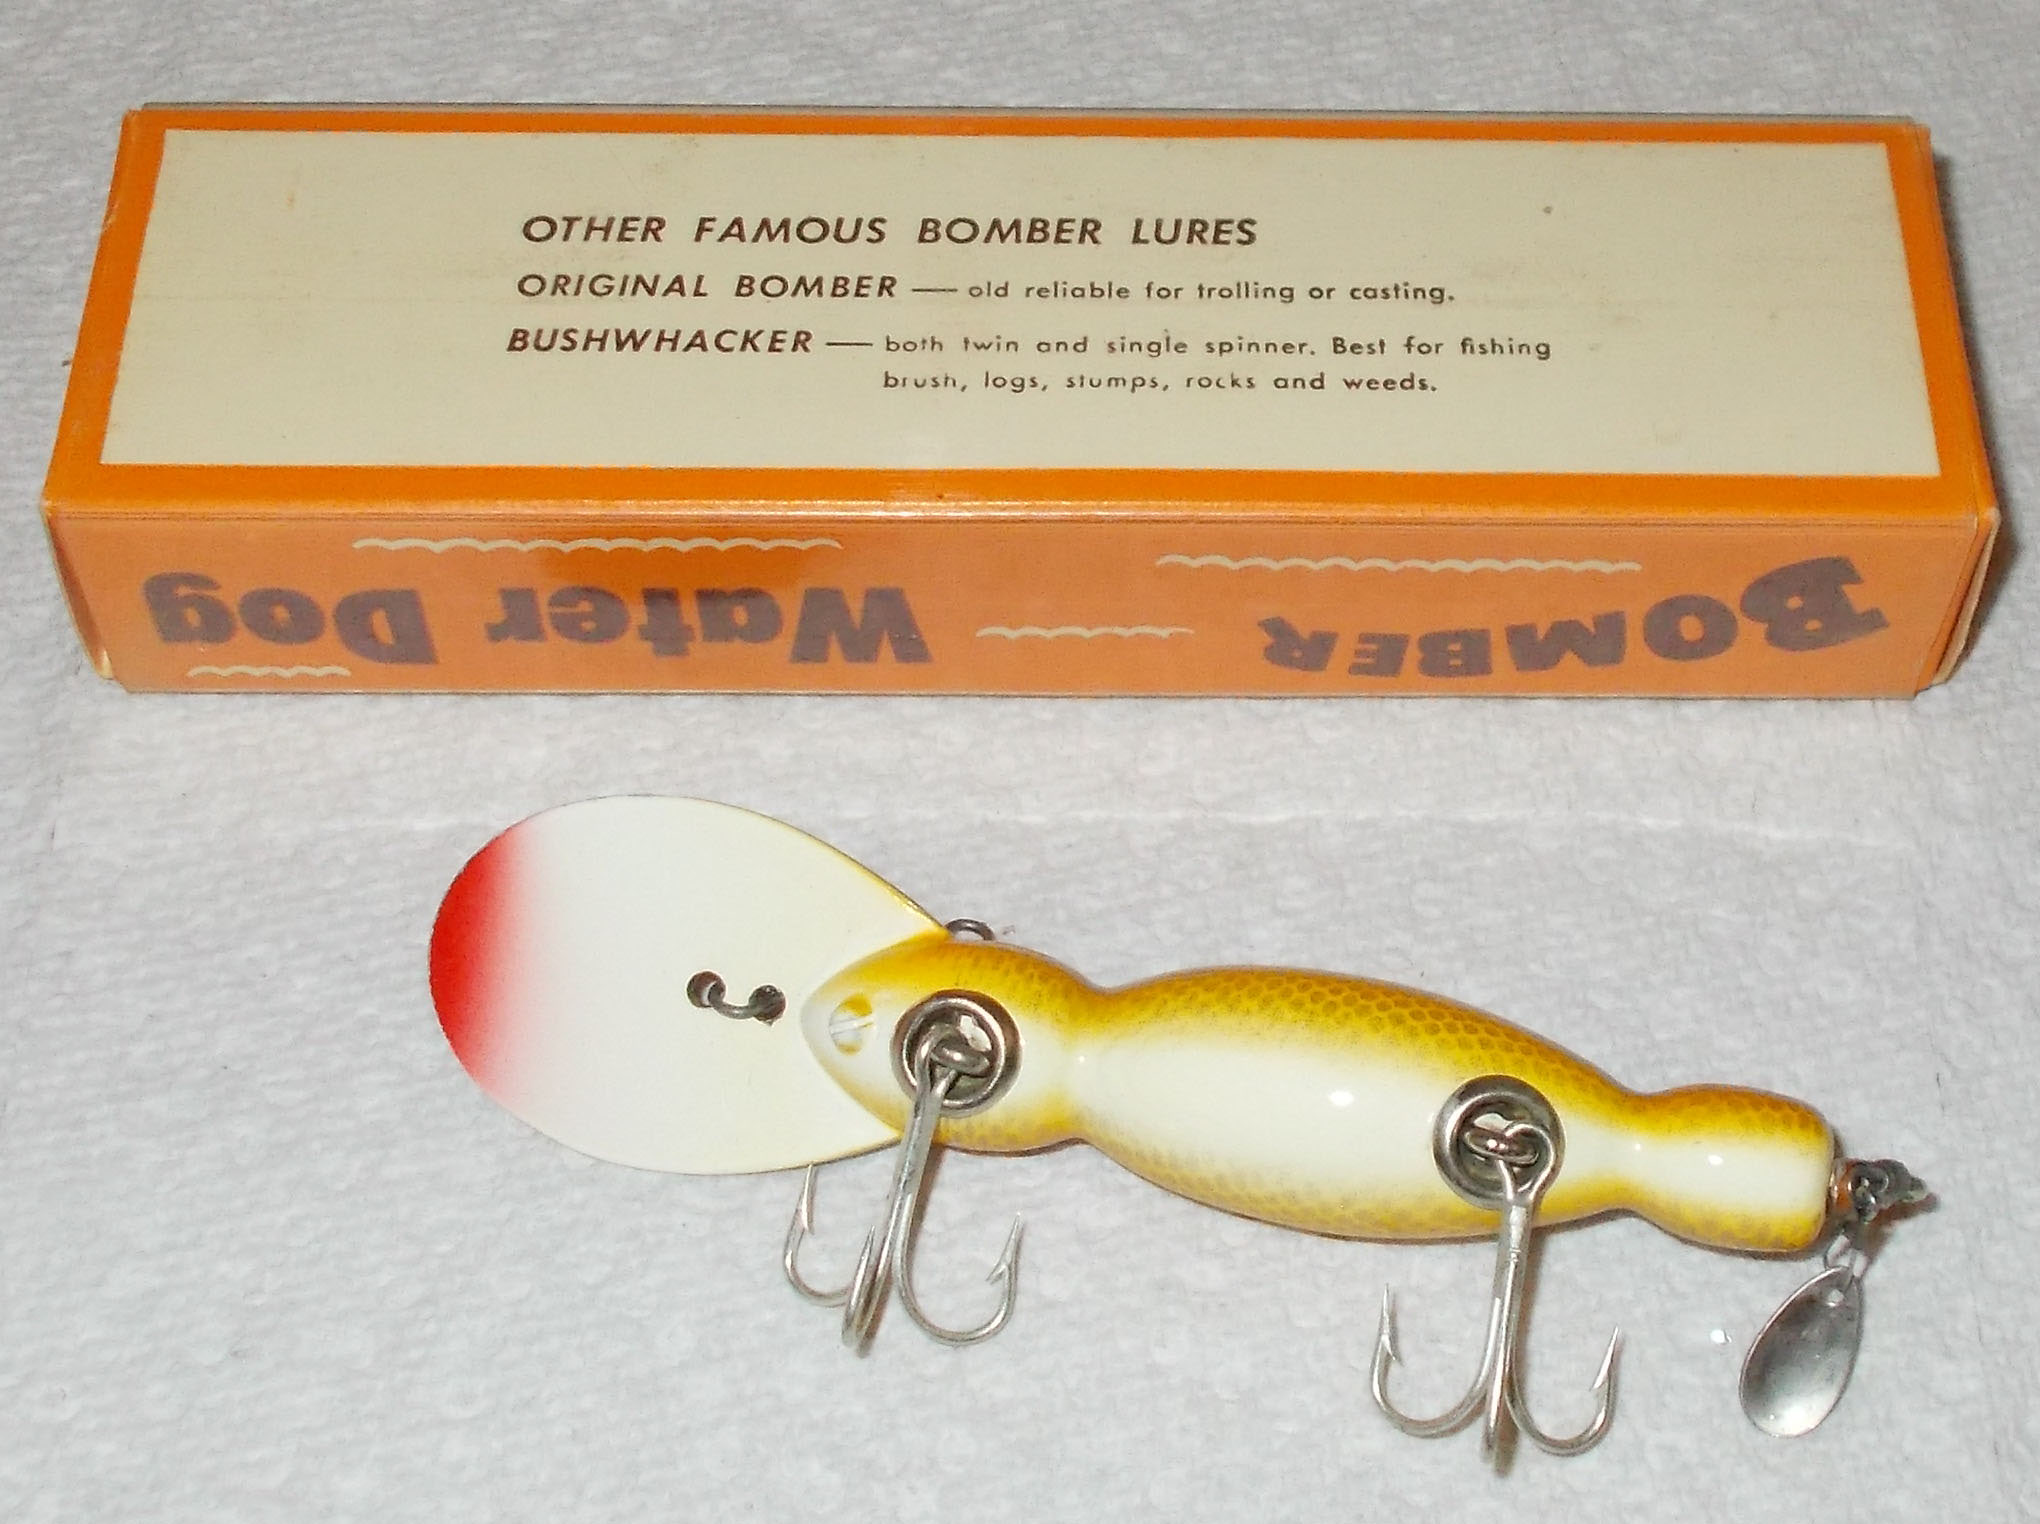 VINTAGE Fishing Lure BOMBER WATE DOG DIVING IN BOX W/INSERT